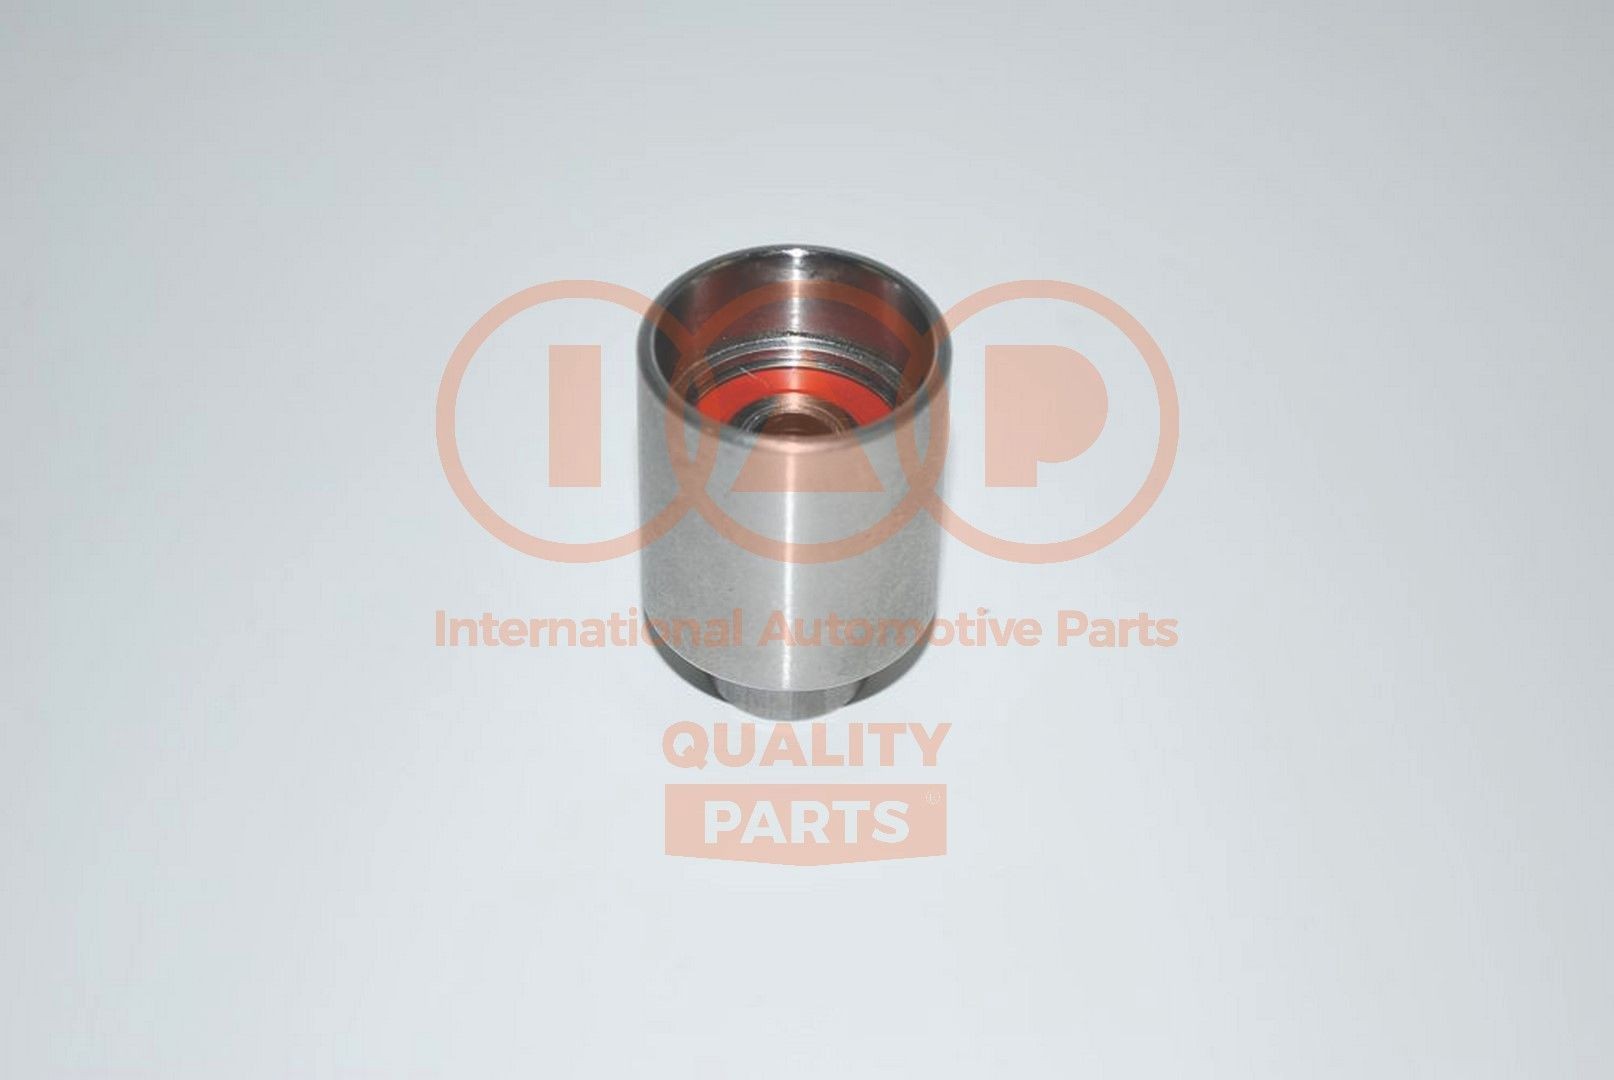 IAP QUALITY PARTS Tensioner pulley, timing belt 127-15033 buy